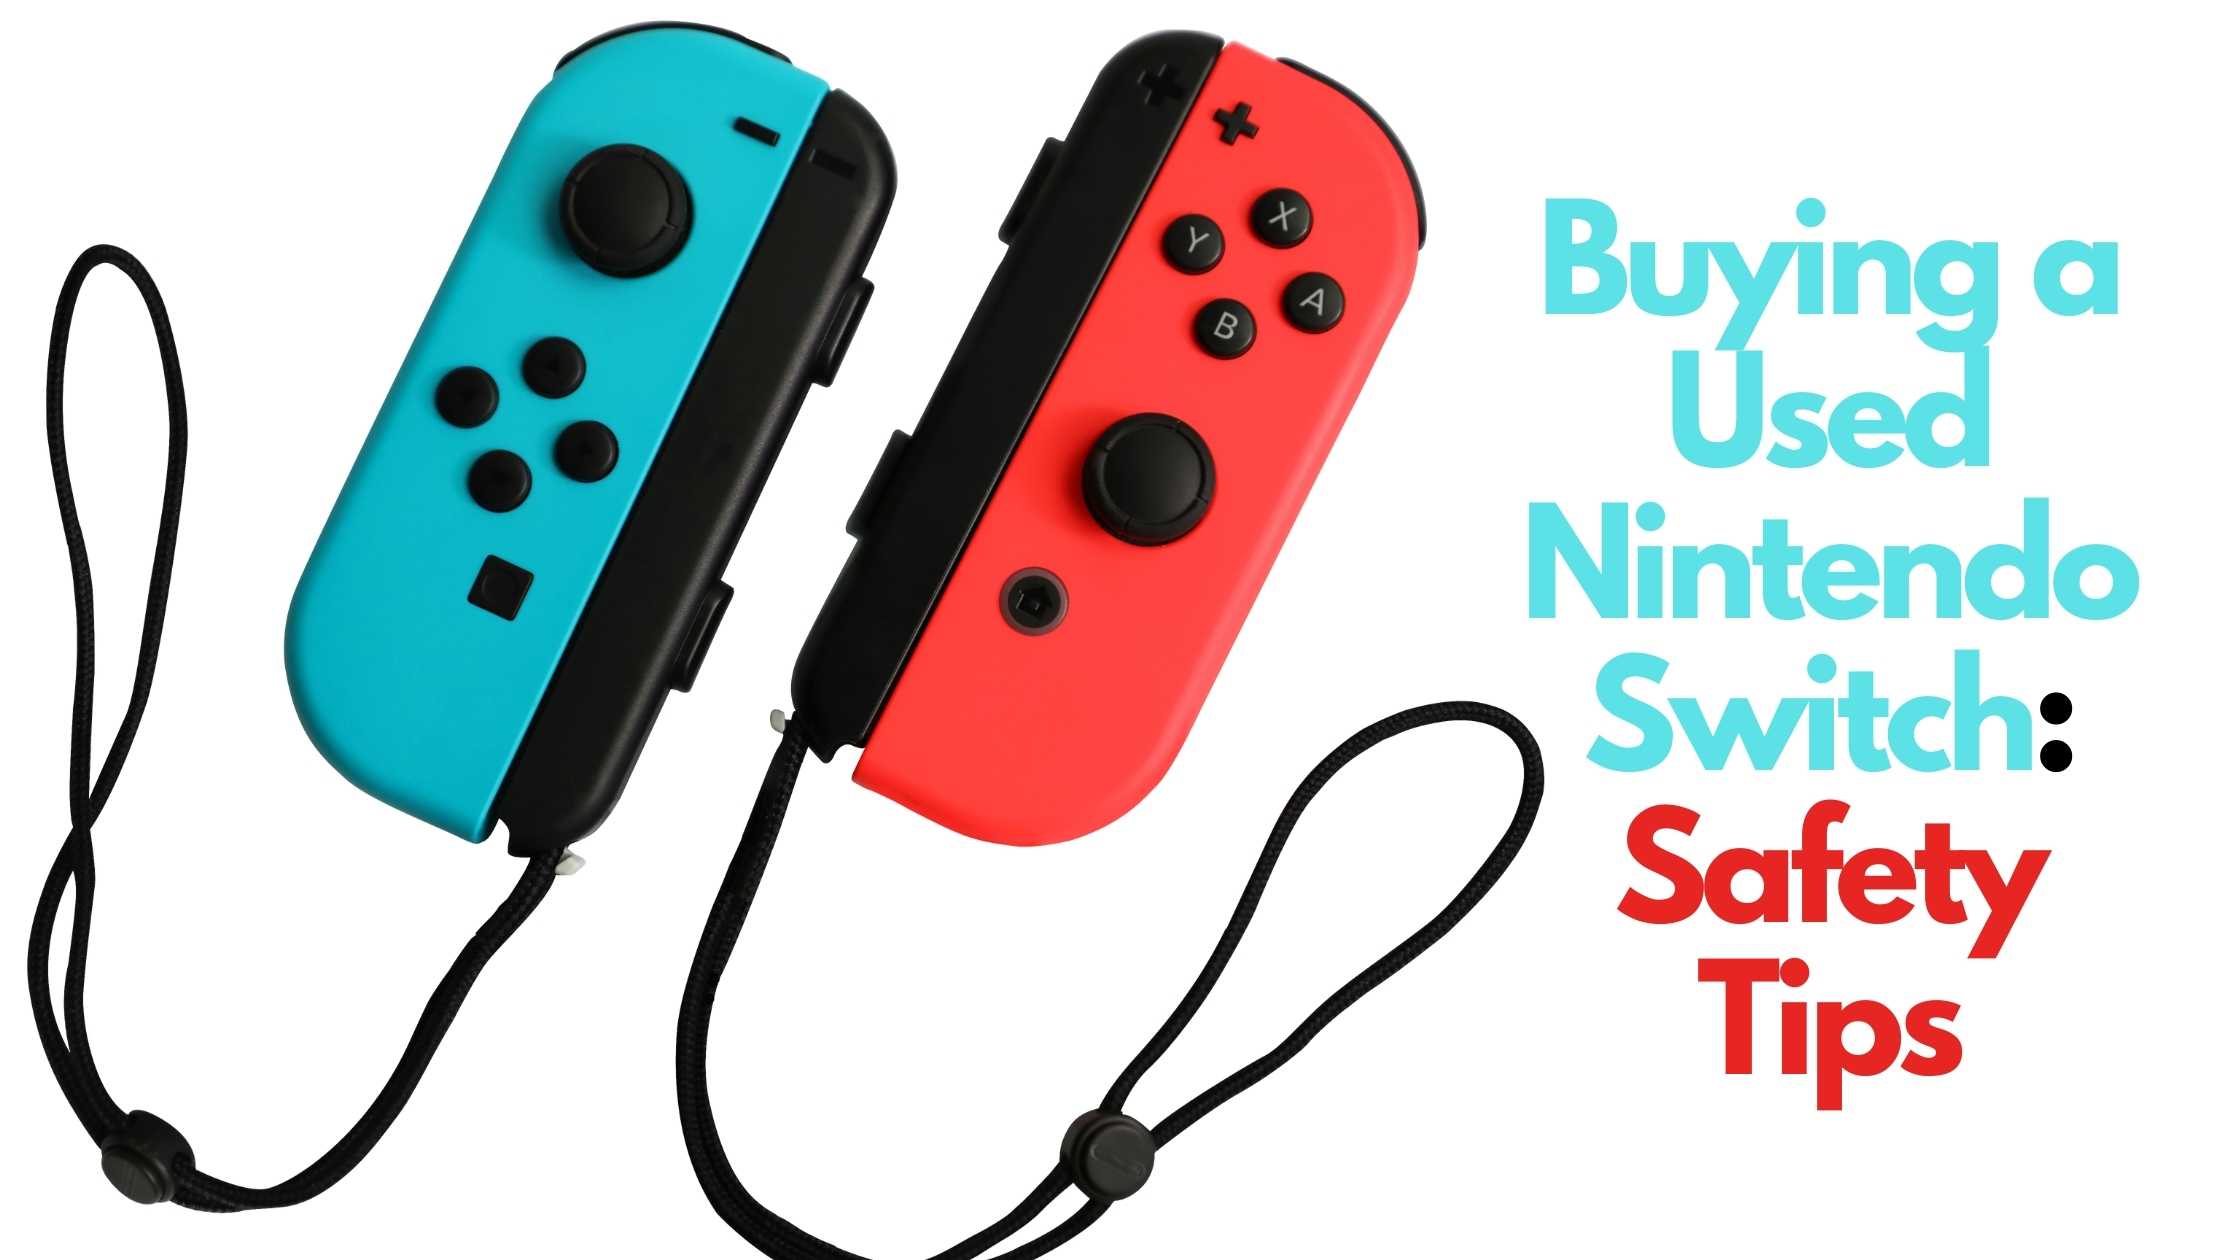 Buying a used Nintendo Switch Safety Tips